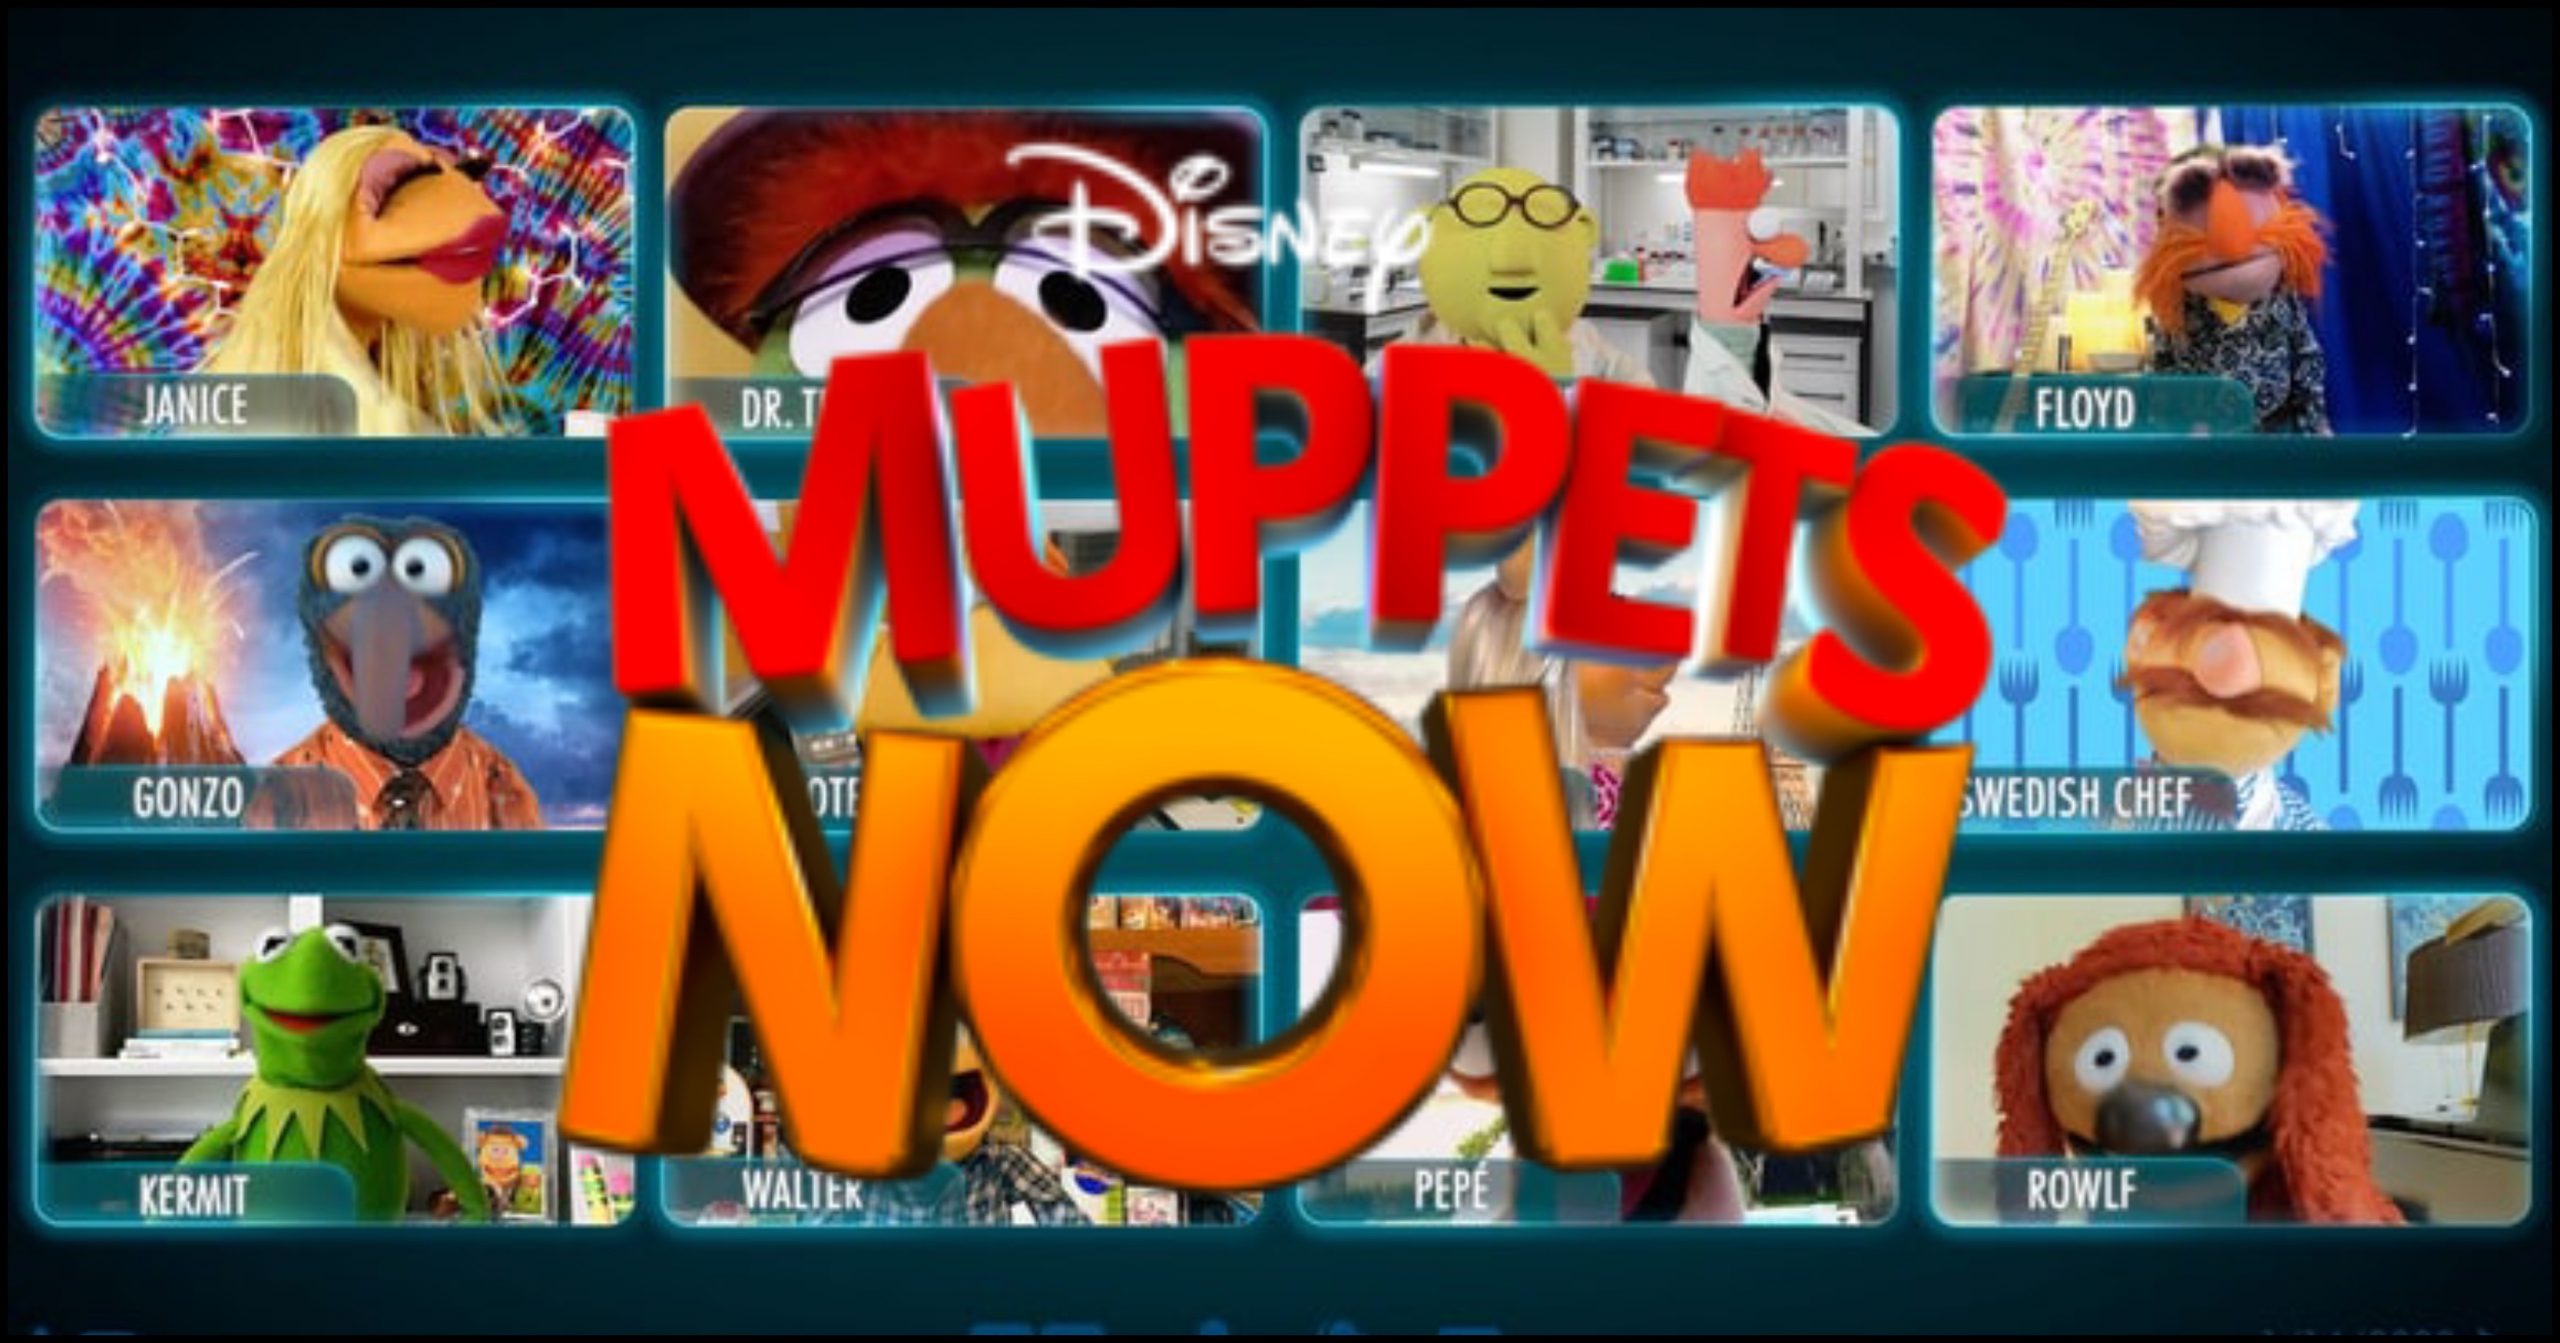 Our Review and Interview for ‘Muppets Now’ on Disney+